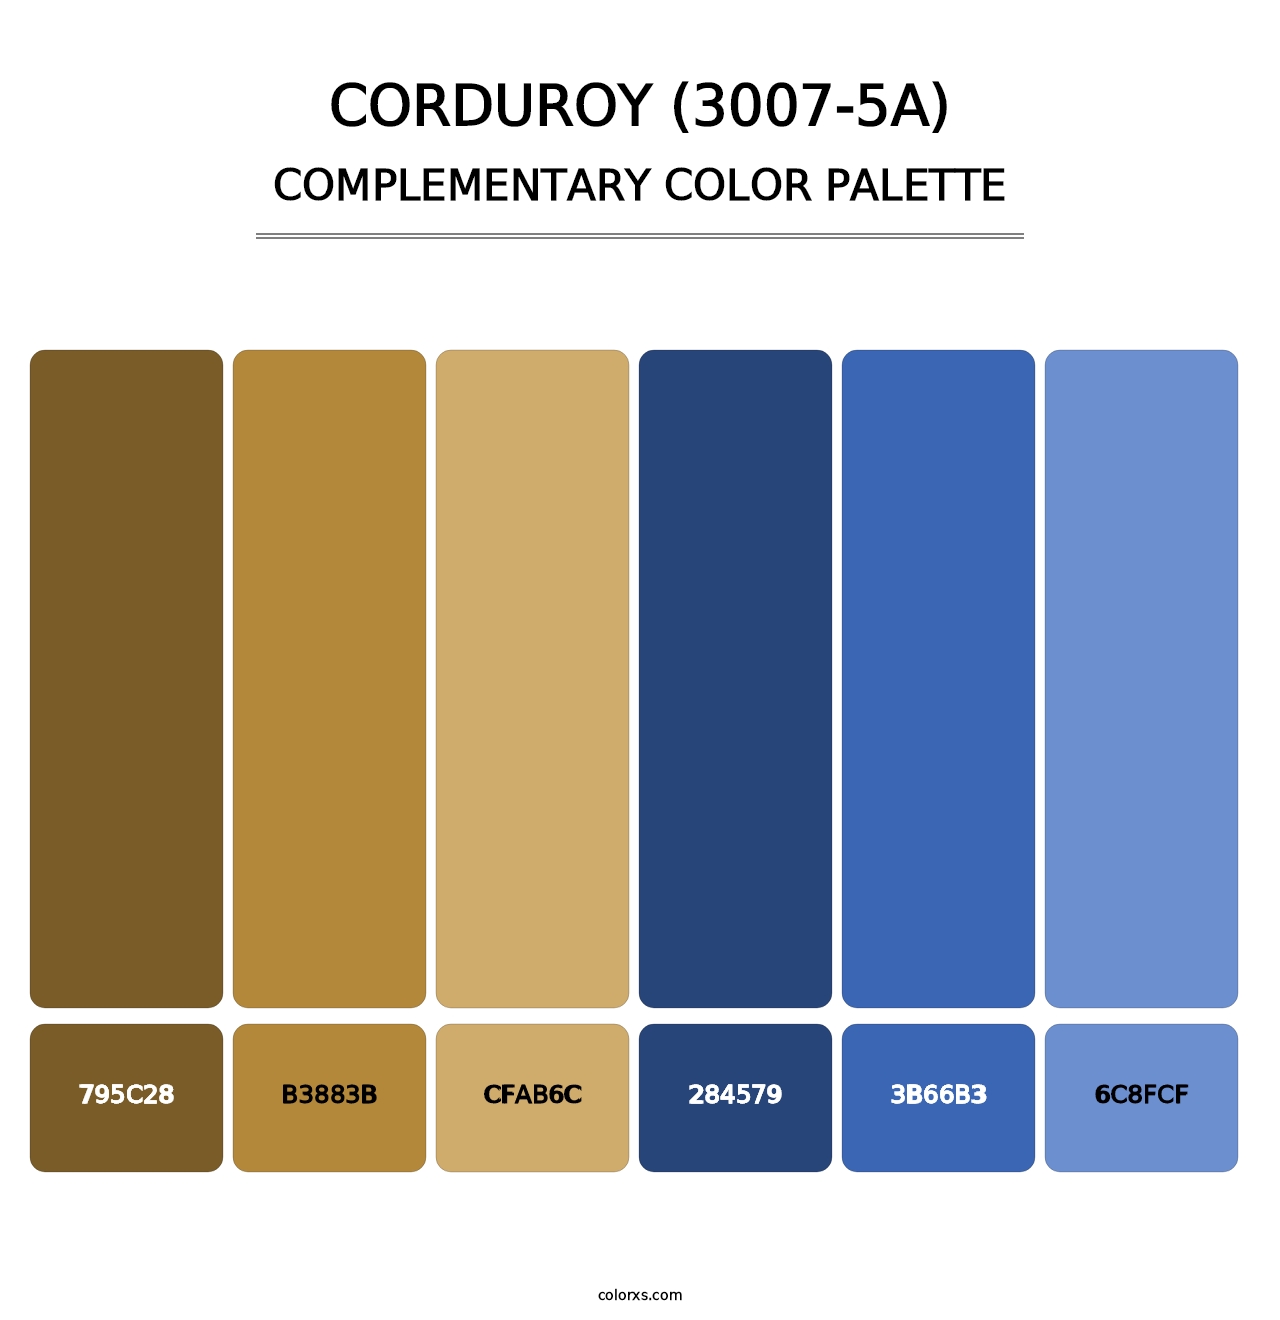 Corduroy (3007-5A) - Complementary Color Palette